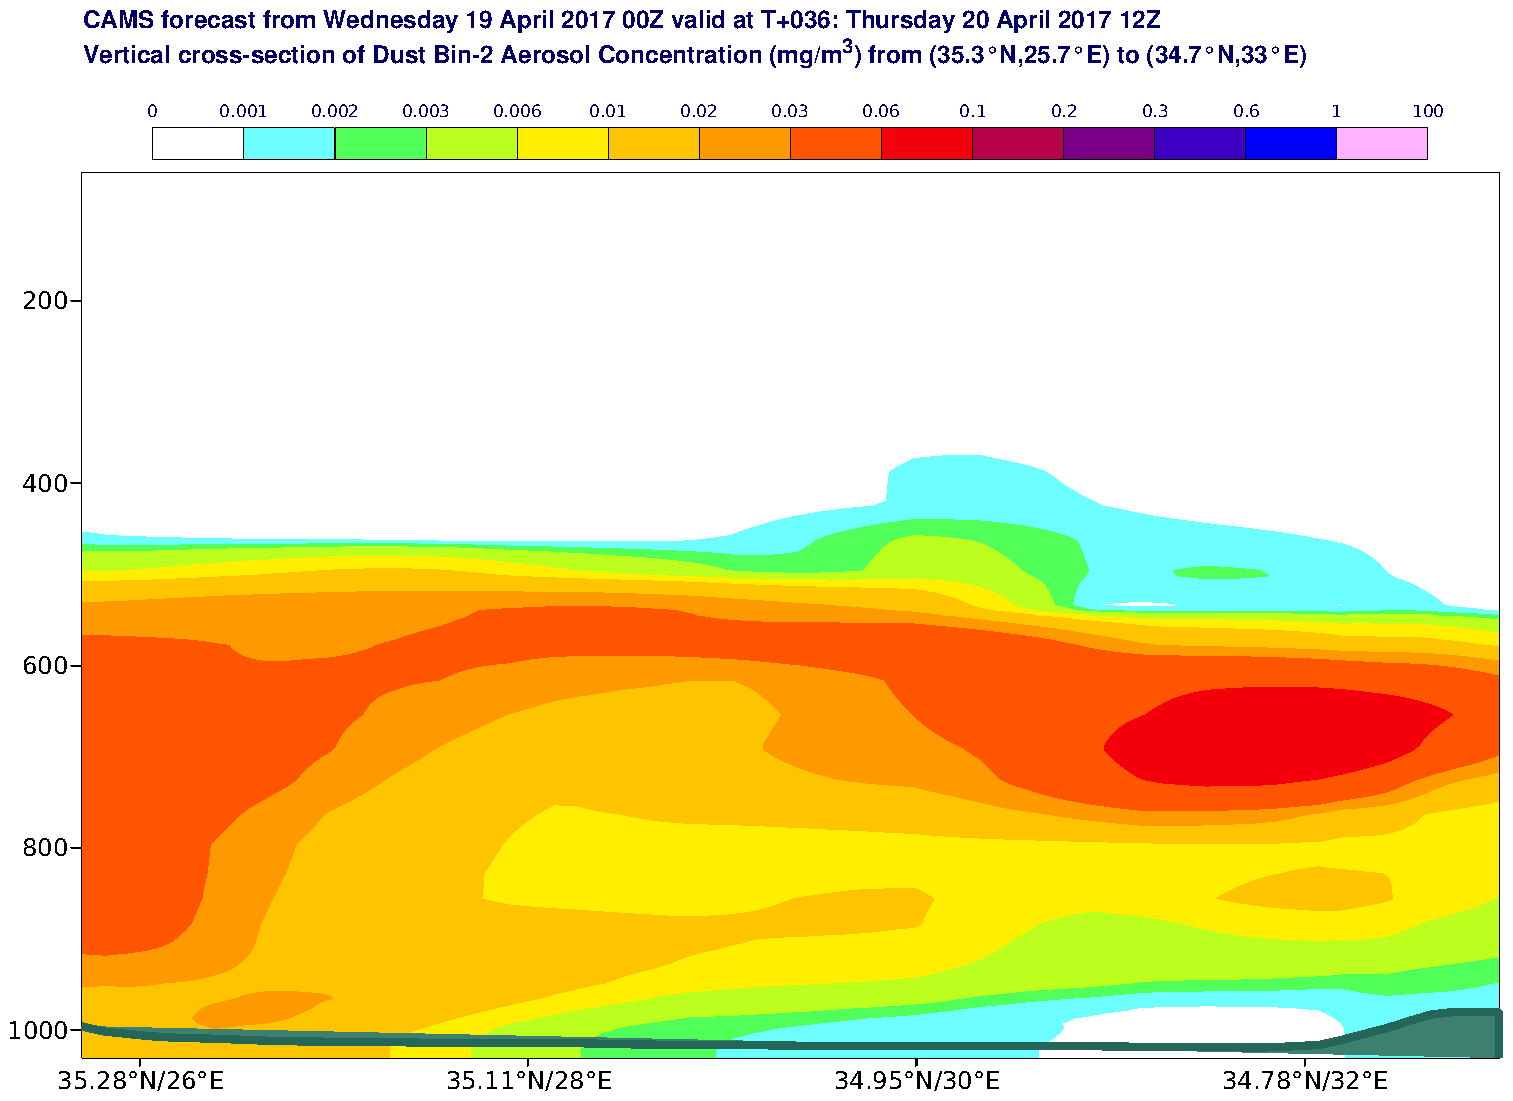 Vertical cross-section of Dust Bin-2 Aerosol Concentration (mg/m3) valid at T36 - 2017-04-20 12:00